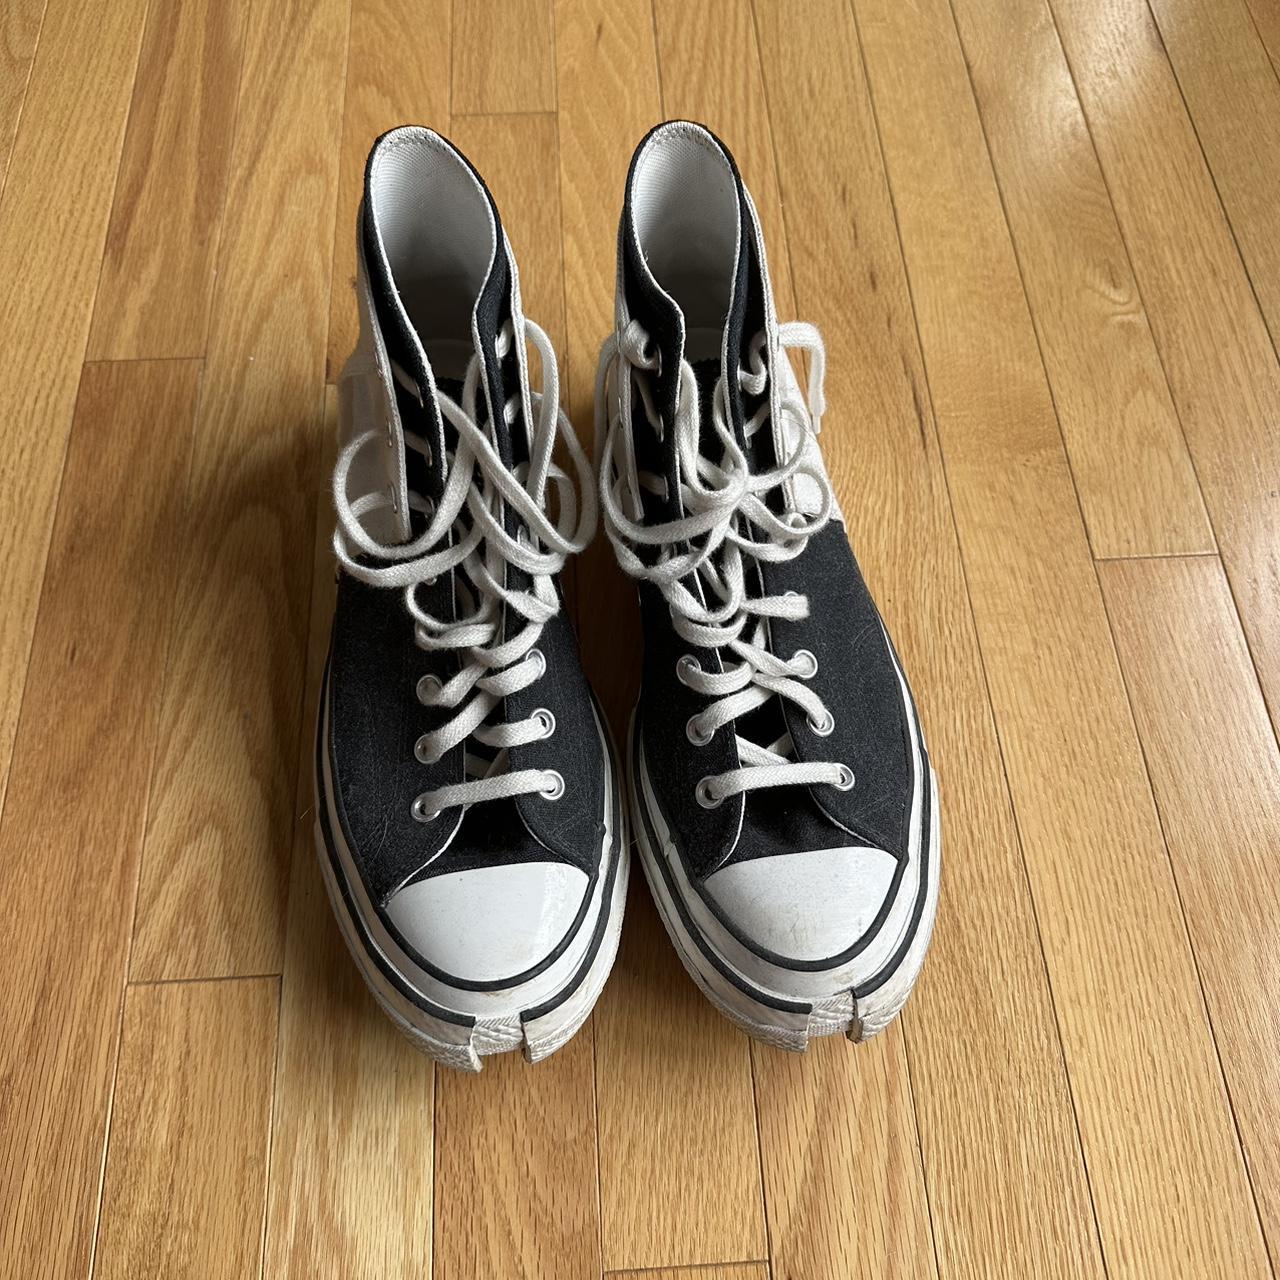 Feng Chen Wang Men's Black and White Trainers (3)